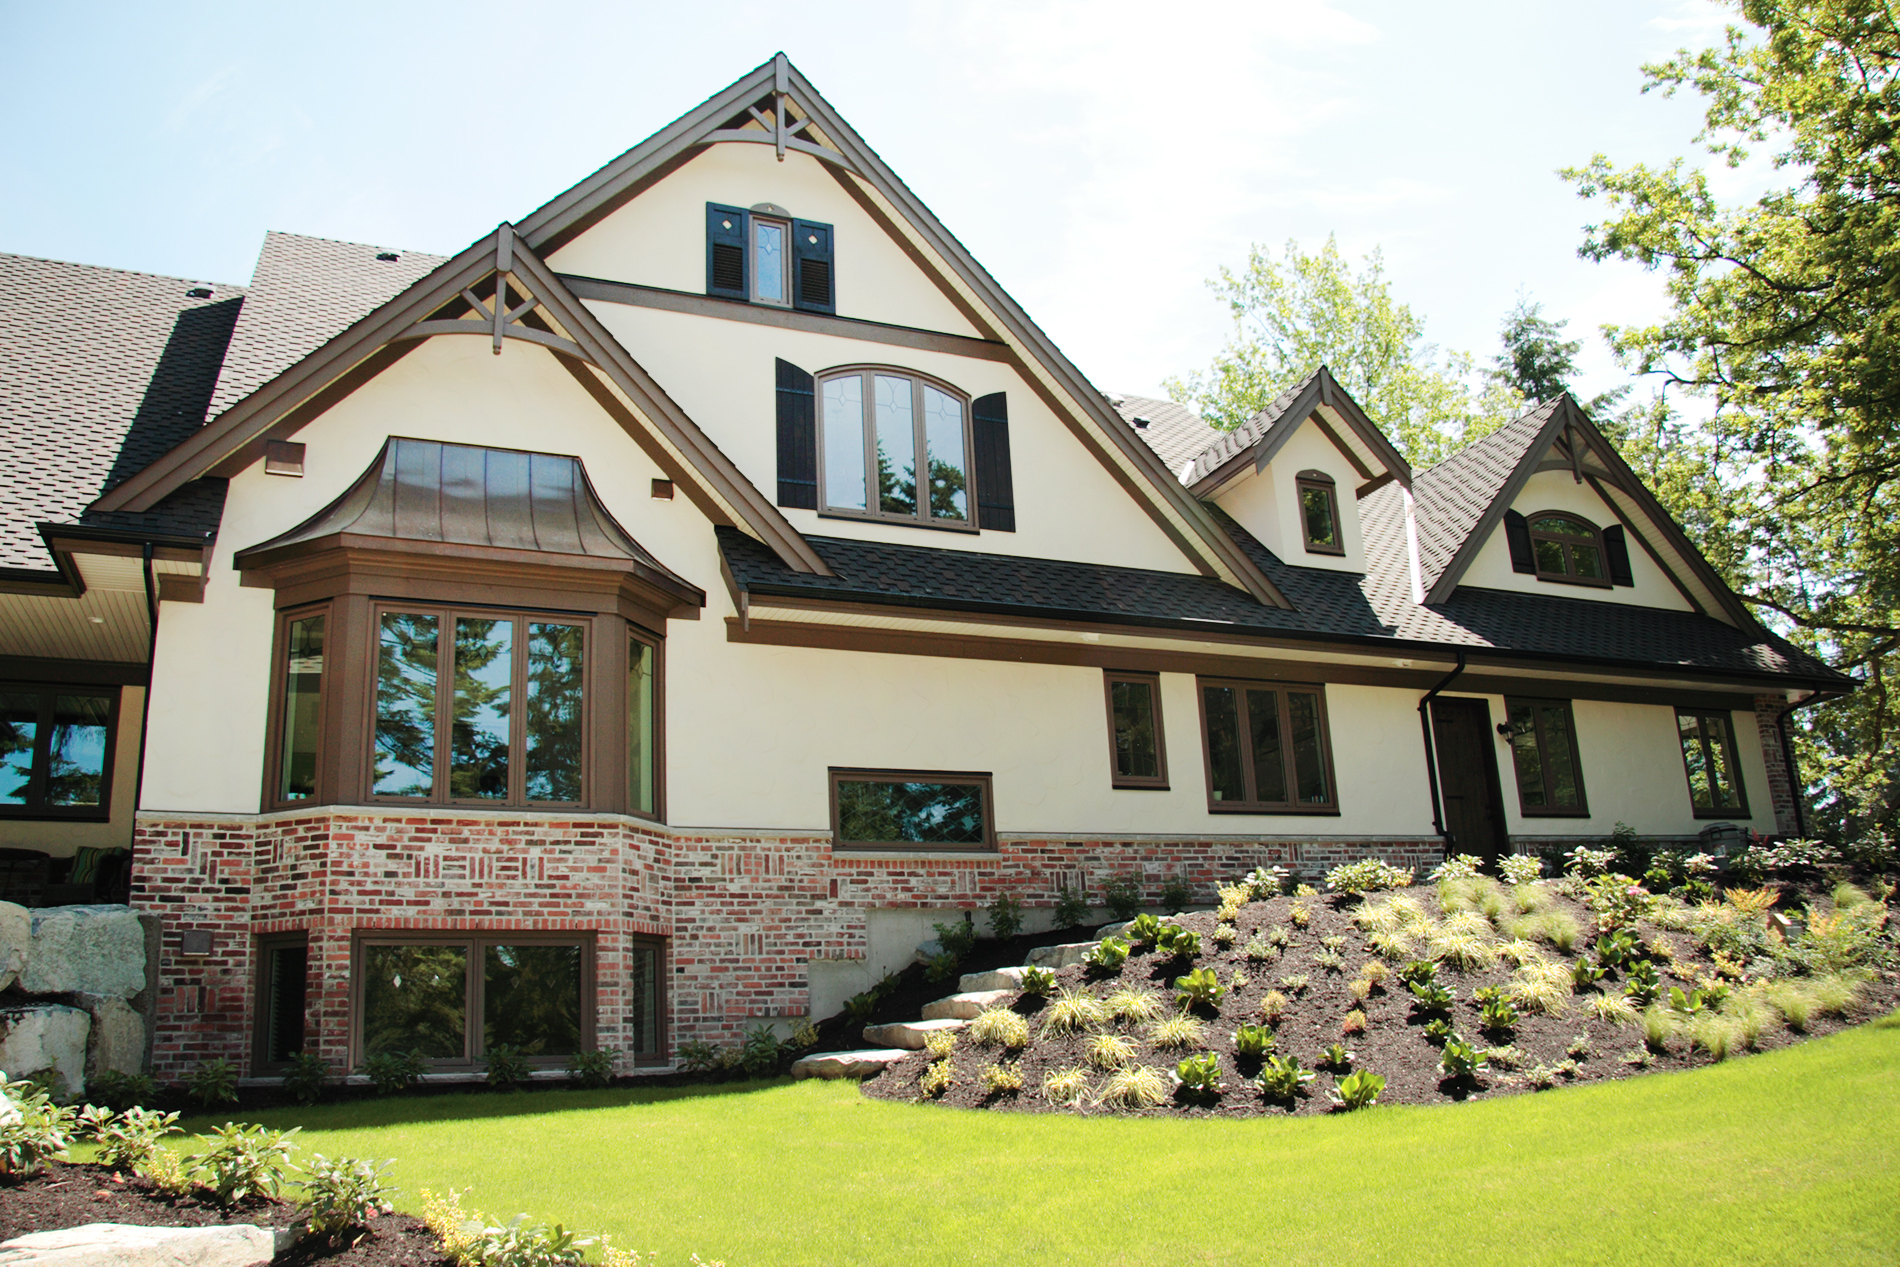 The front exterior view of a traditional style home with custom brown vinyl windows. 